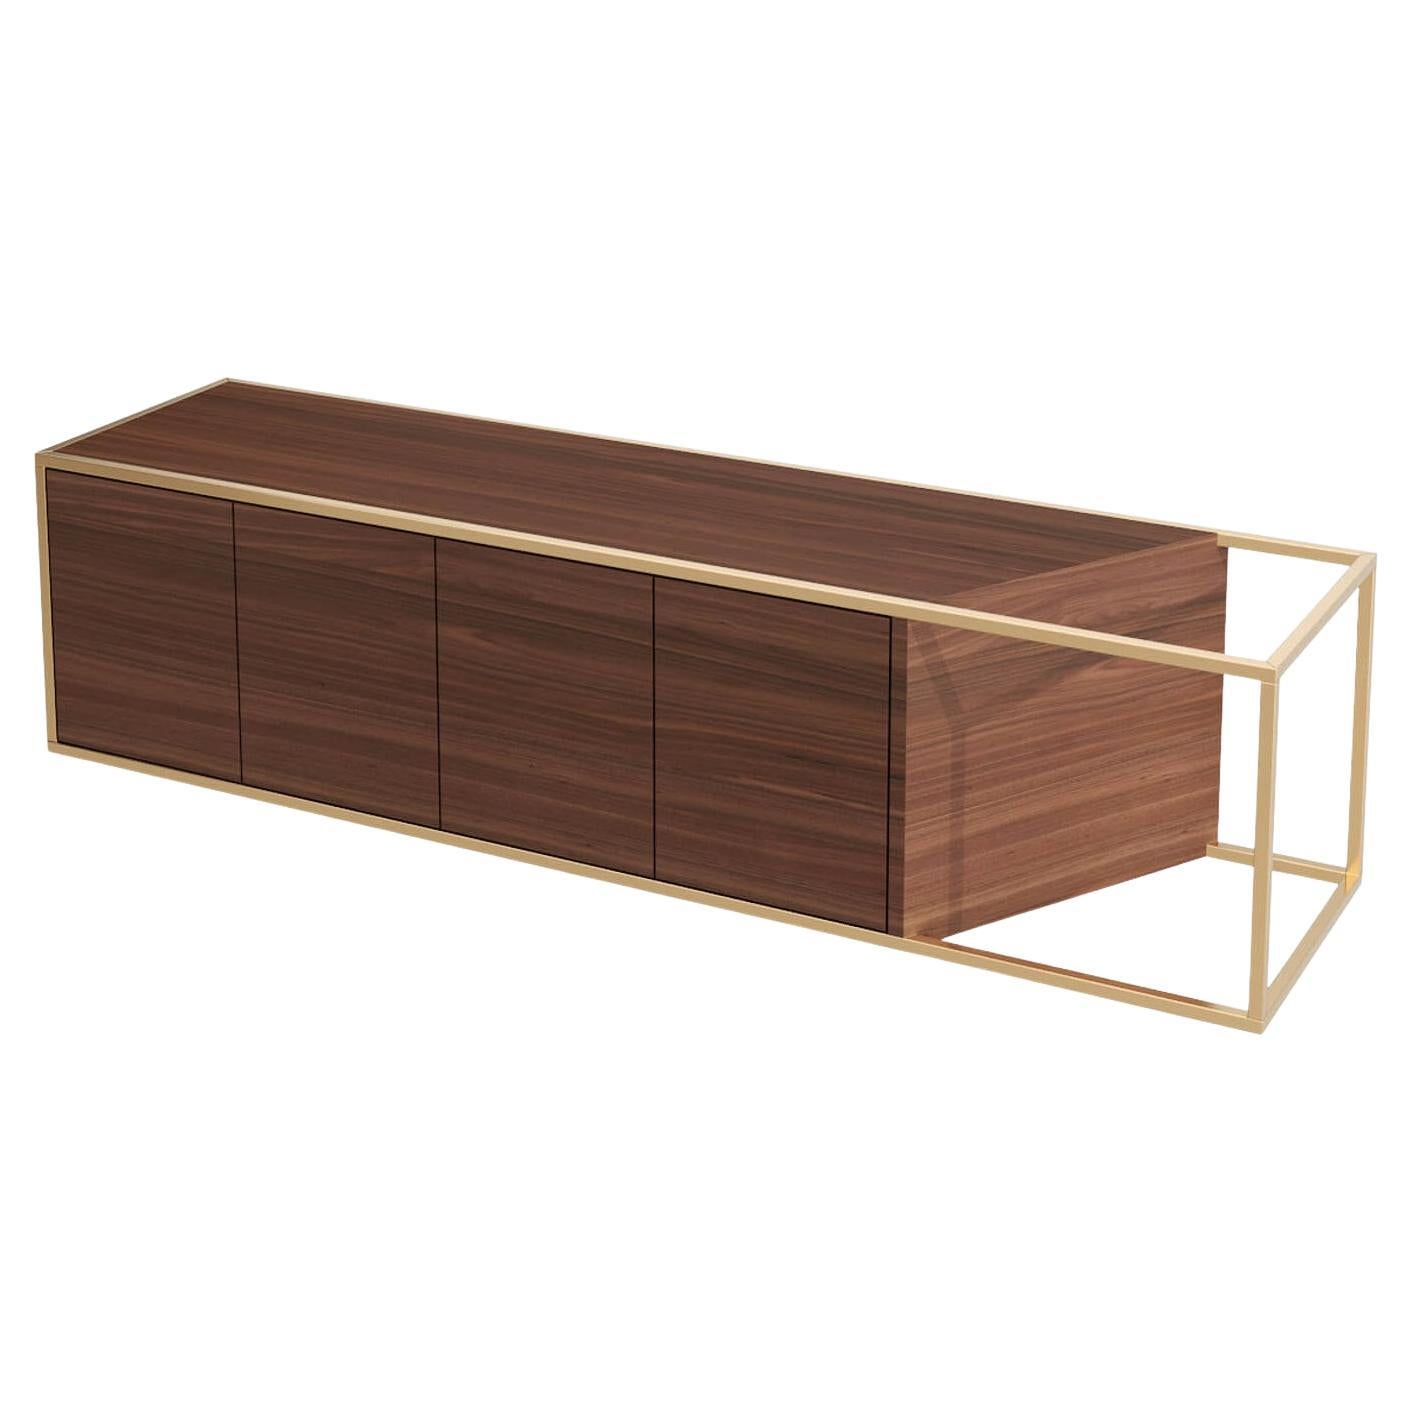 Modern Minimalist Suspended Credenza Sideboard in Walnut Wood and Brushed Brass